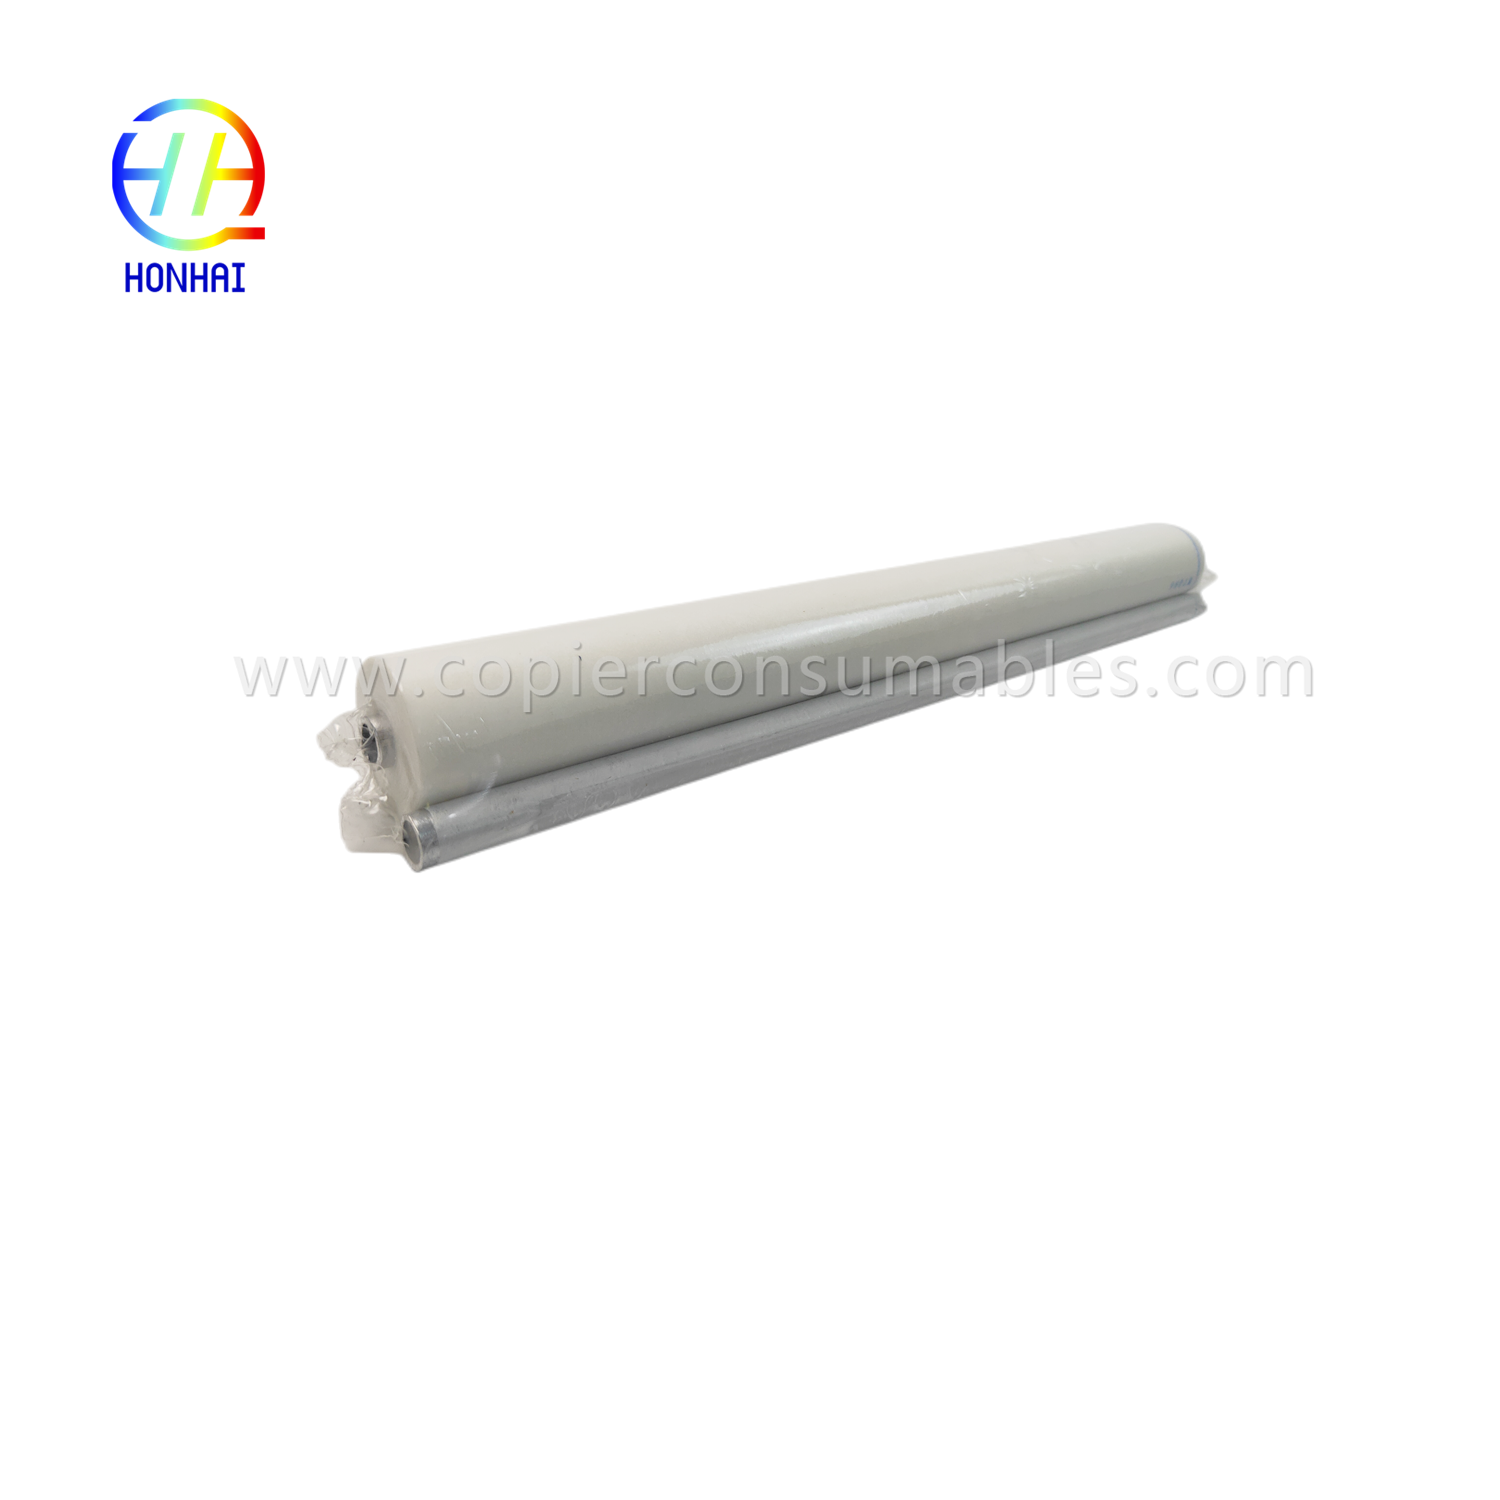 https://www.copierconsumables.com/fuser-cleaning-web-for-canon-ir6800-ir-8085-8095-8105-8205-8285-8295-fq-009-fc5-2286-000-oem-fuser- rense-fuser-rulle-produkt/